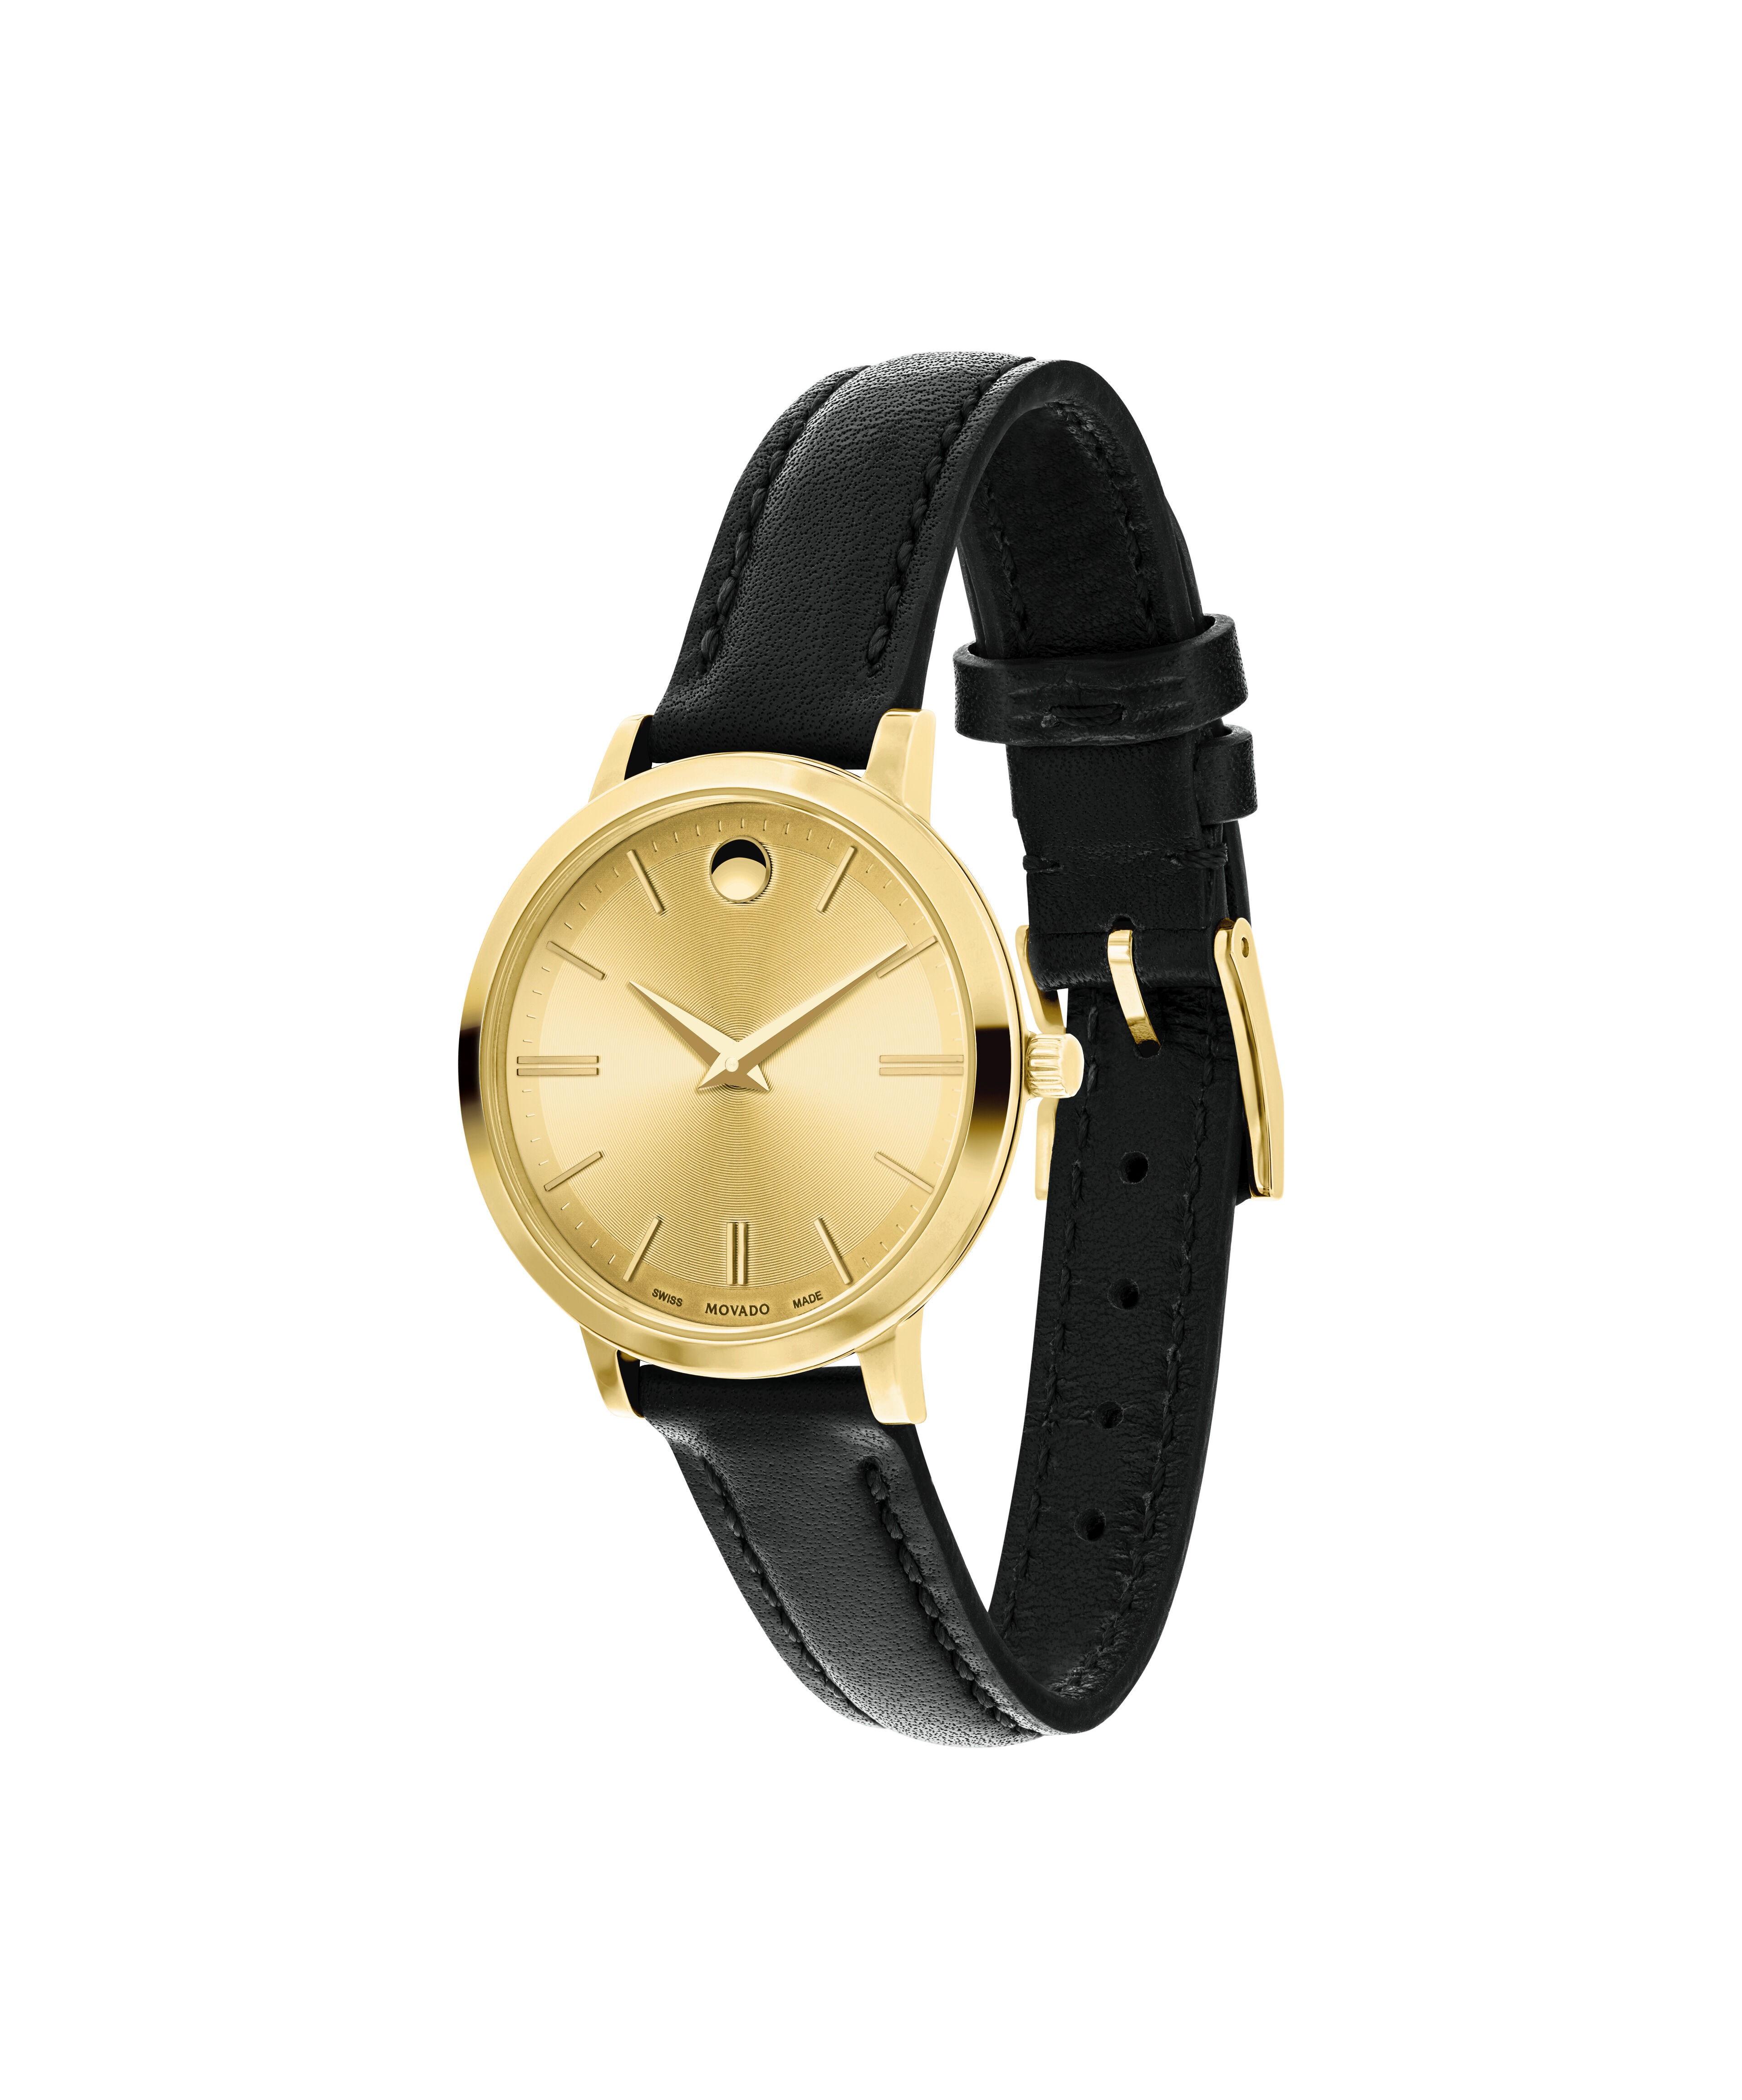 Movado Automatic FB Case Gold Capped Bumper C224 Vintage PatinaMovado Automatic Stainless Steel Ladies Watch